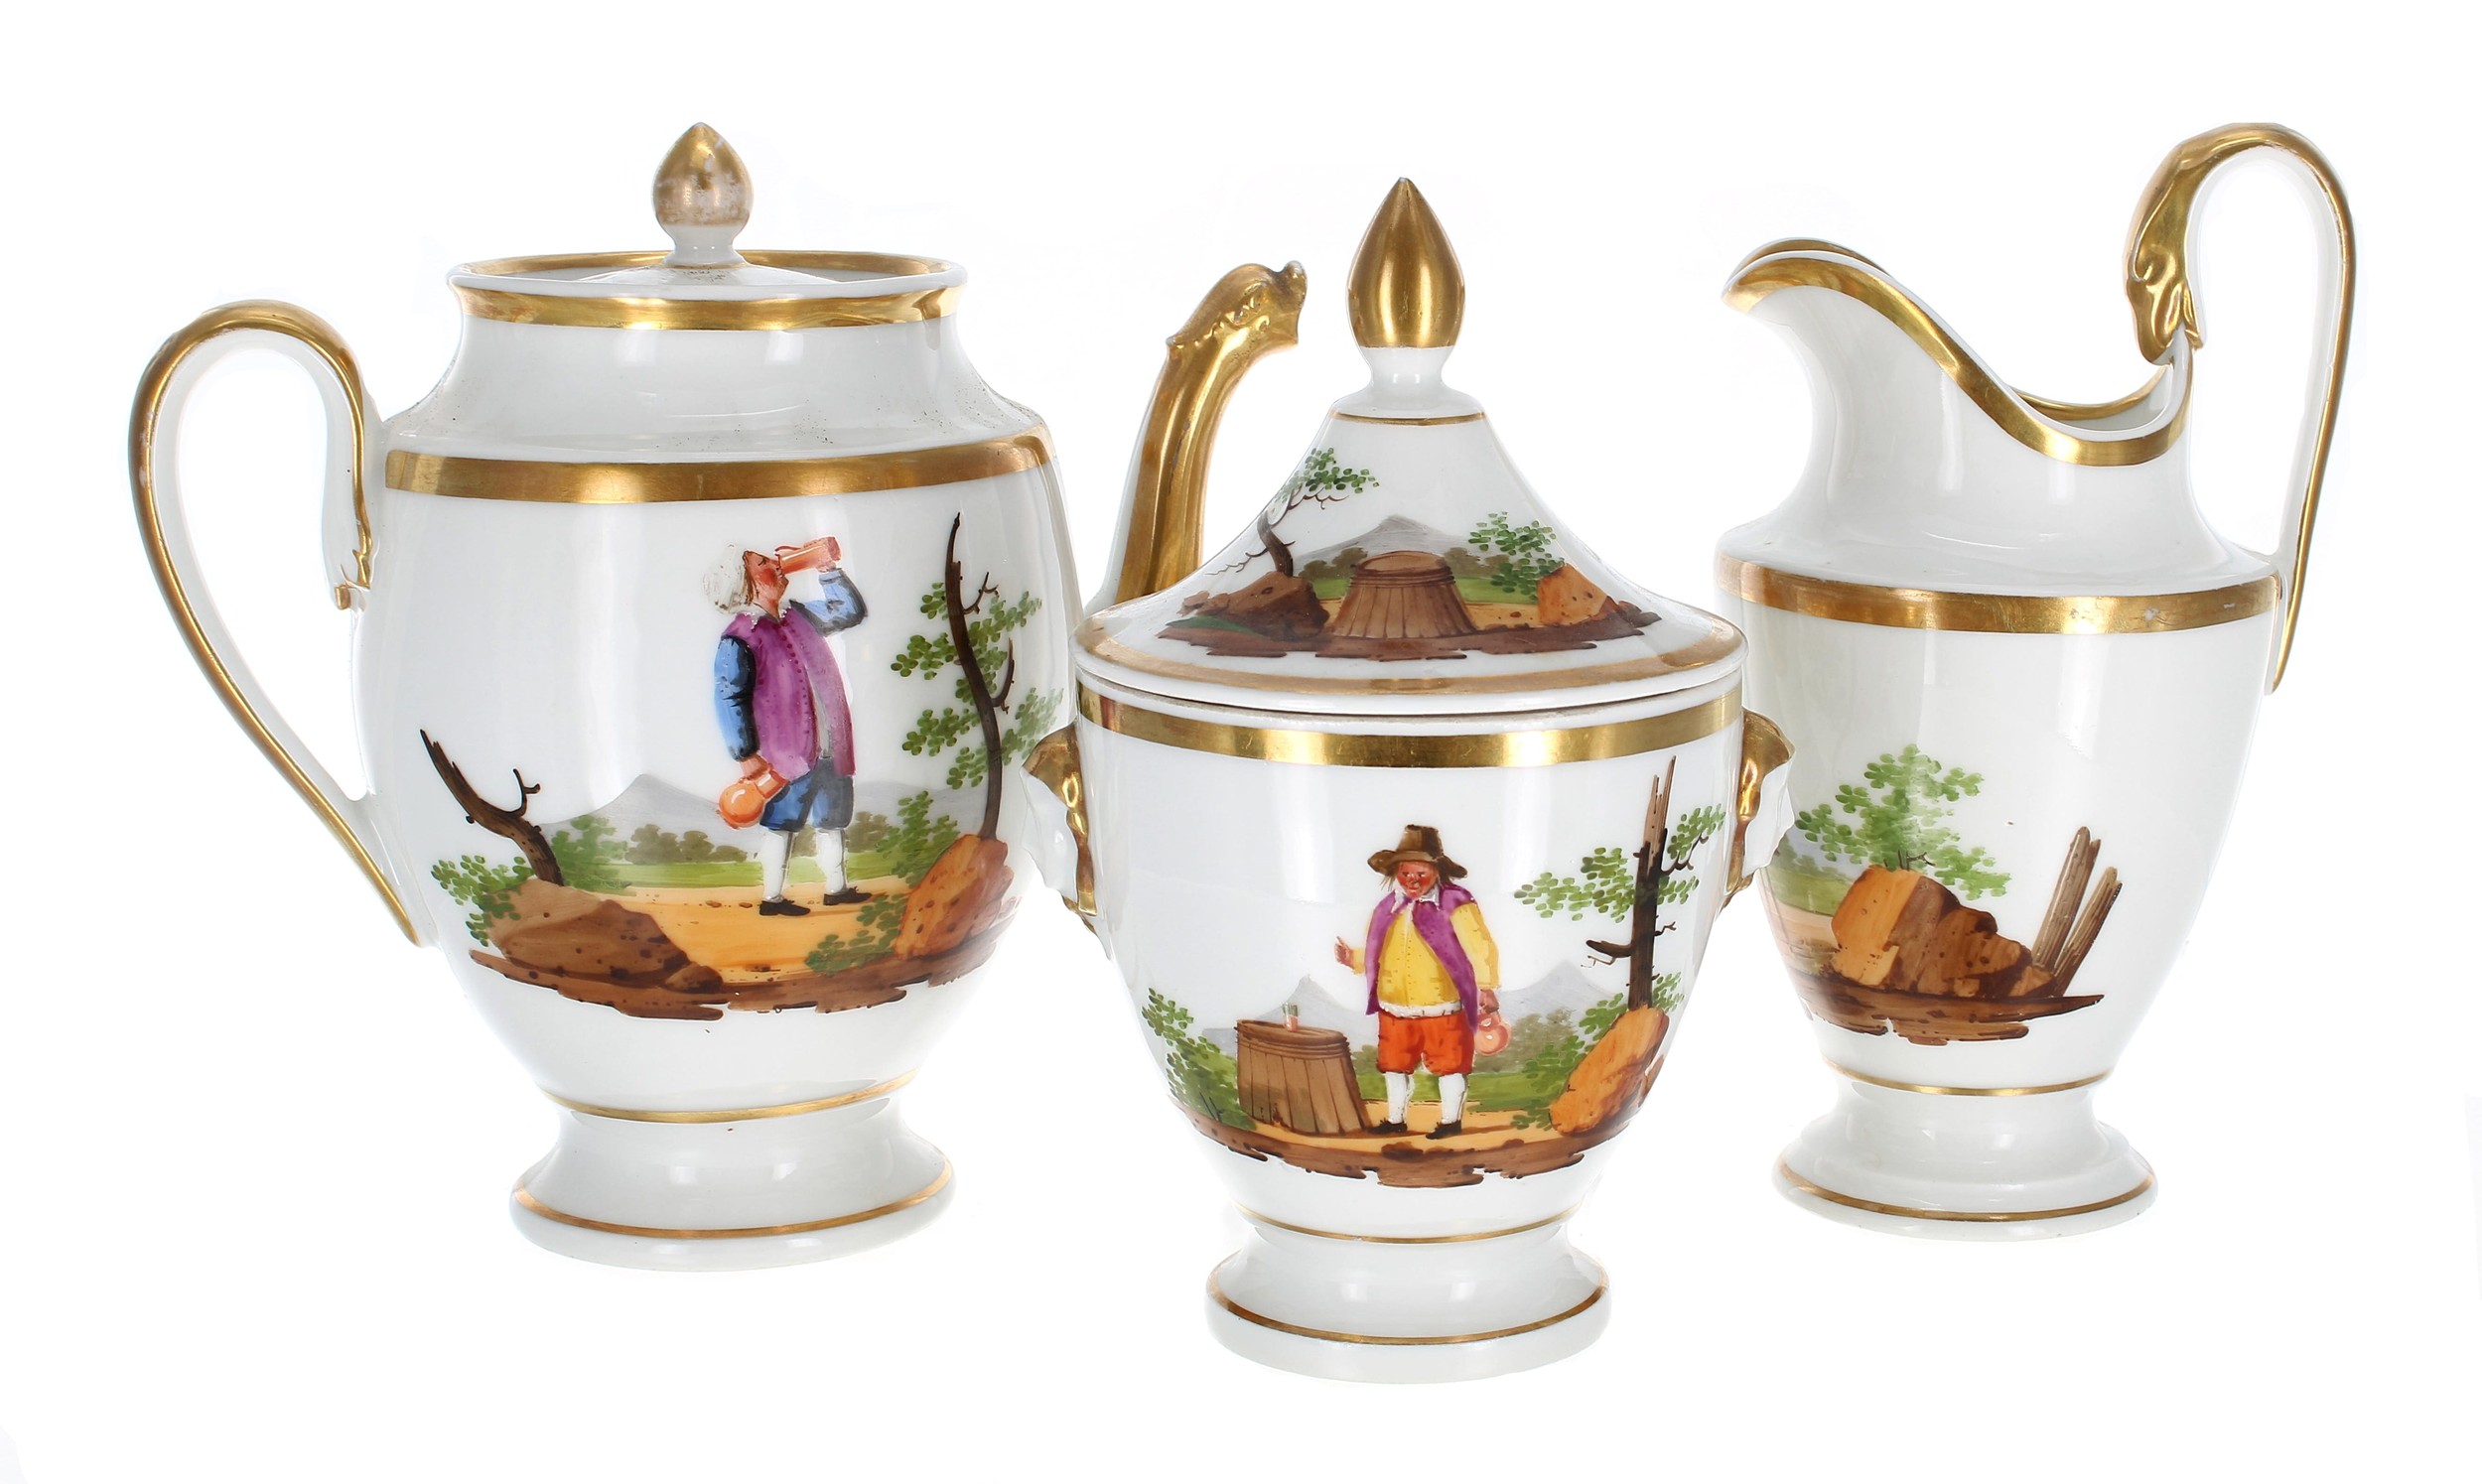 19th century Paris porcelain tea and coffee service, painted with decorated with country folk - Image 2 of 3